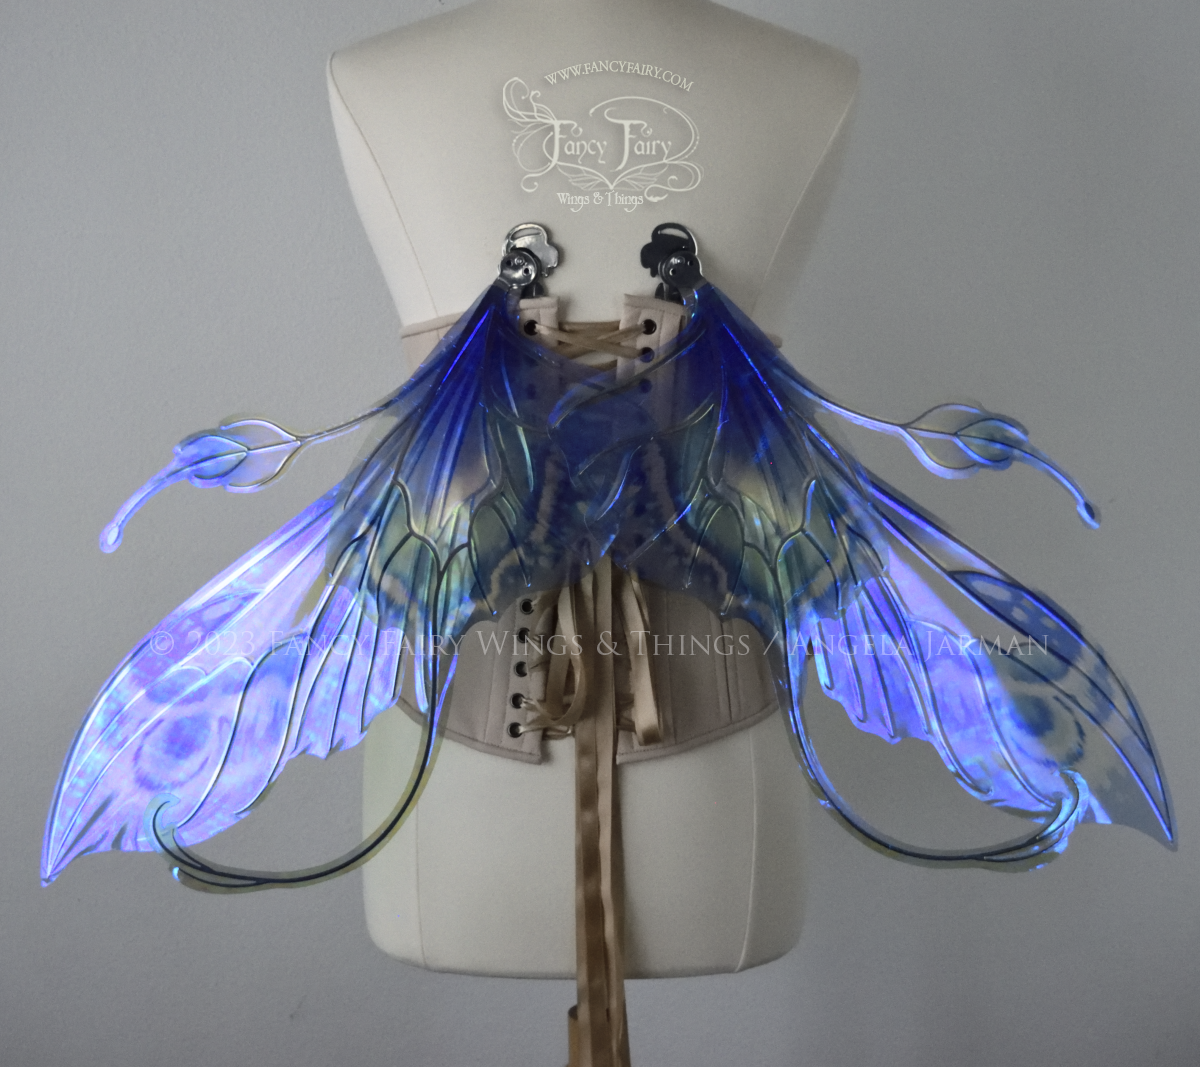 Back view of large blue, violet & teal painted iridescent fairy wings, elongated upper panels with antennae, bottom panels have a tail curving upwards, silver veins, worn on a dress form, in resting position